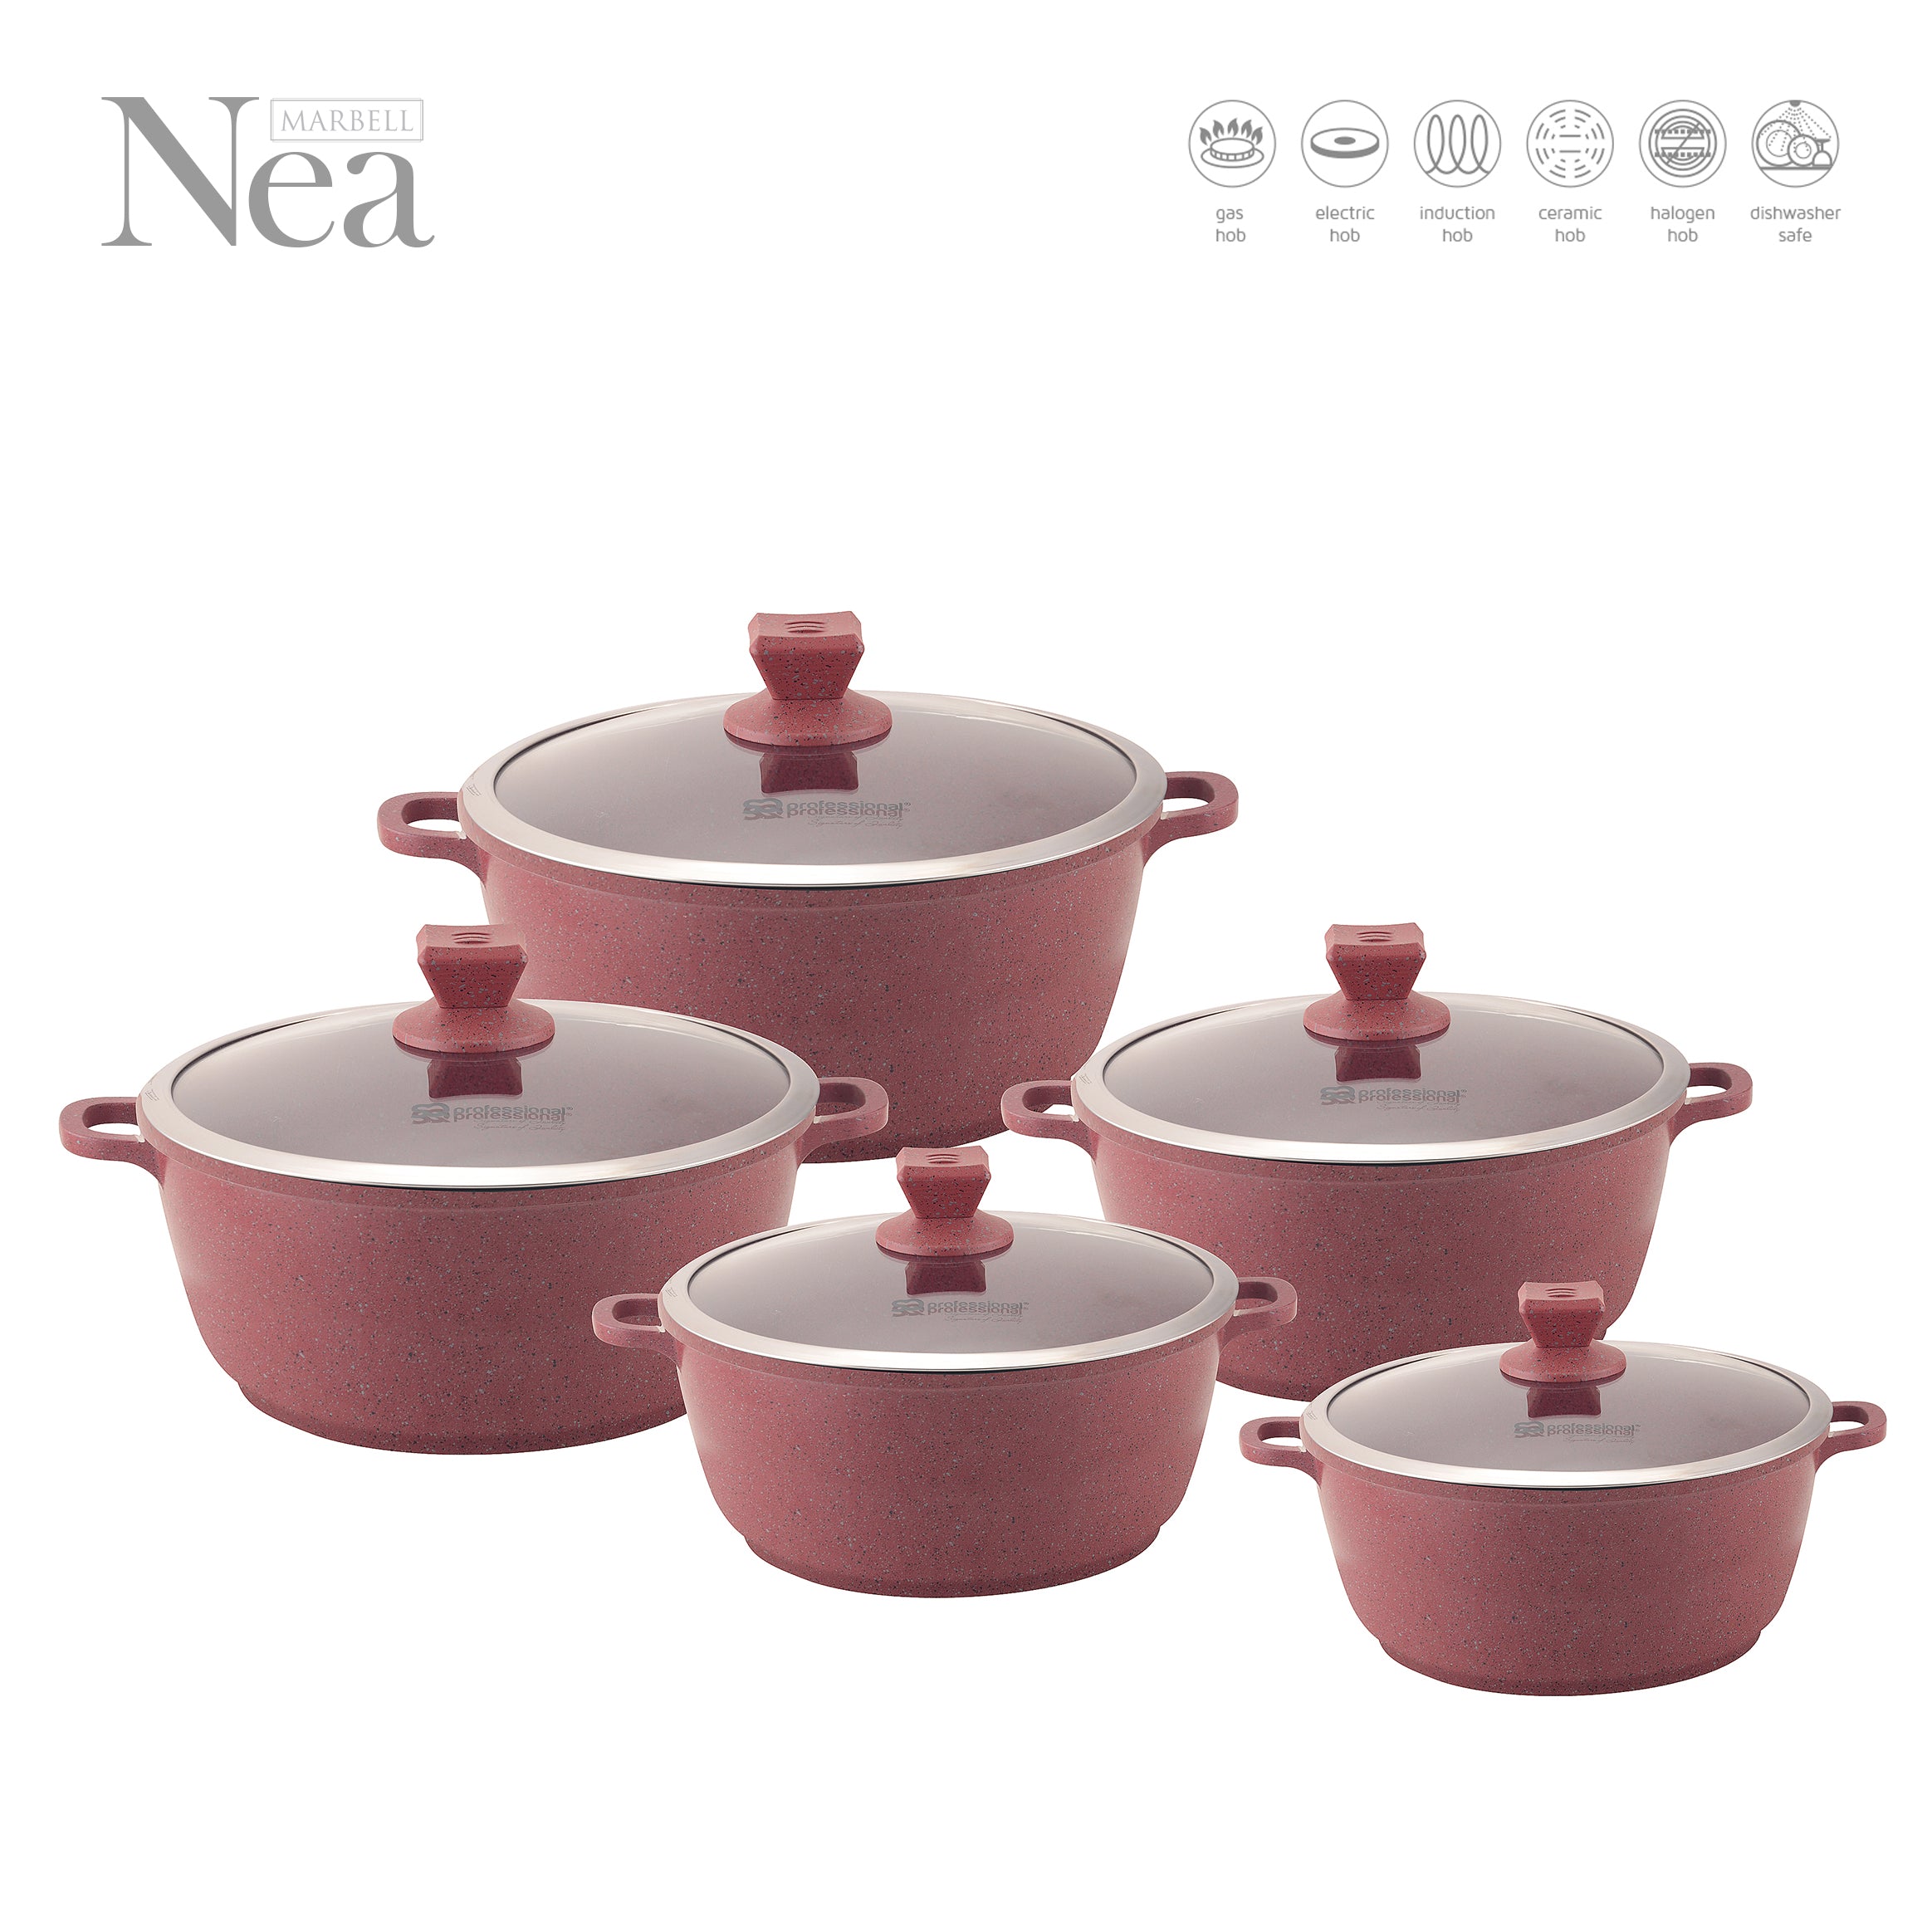 Marble Stockpots With Induction - NEA MARBELL - Red - Round - 5 Pcs Set